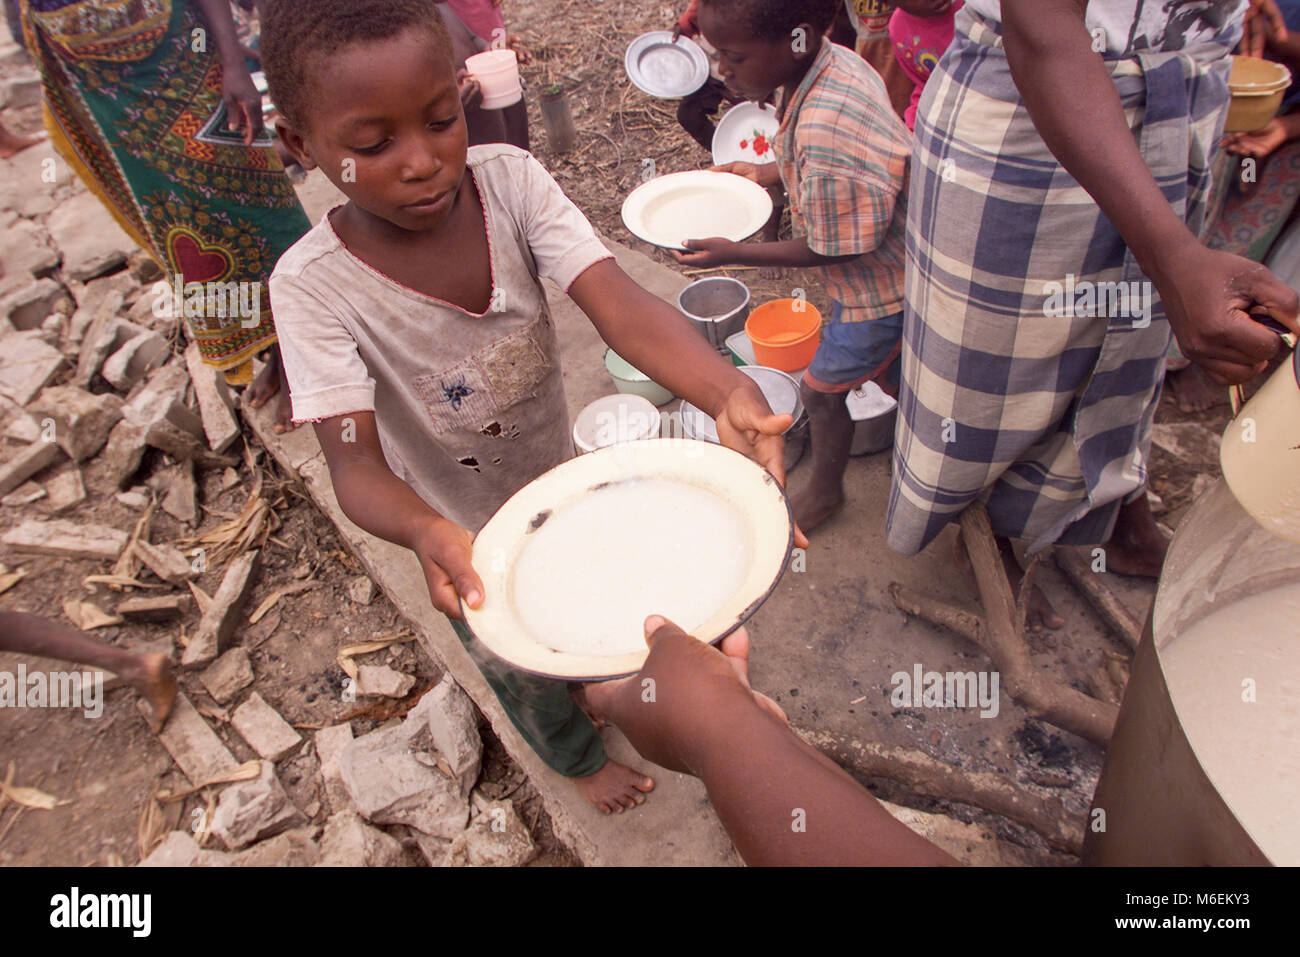 Floods in Mozambique  March 2000; A young boy takes a bowl maize porridge made with relief supplies at Pande camp for flood victims near Save town. Stock Photo